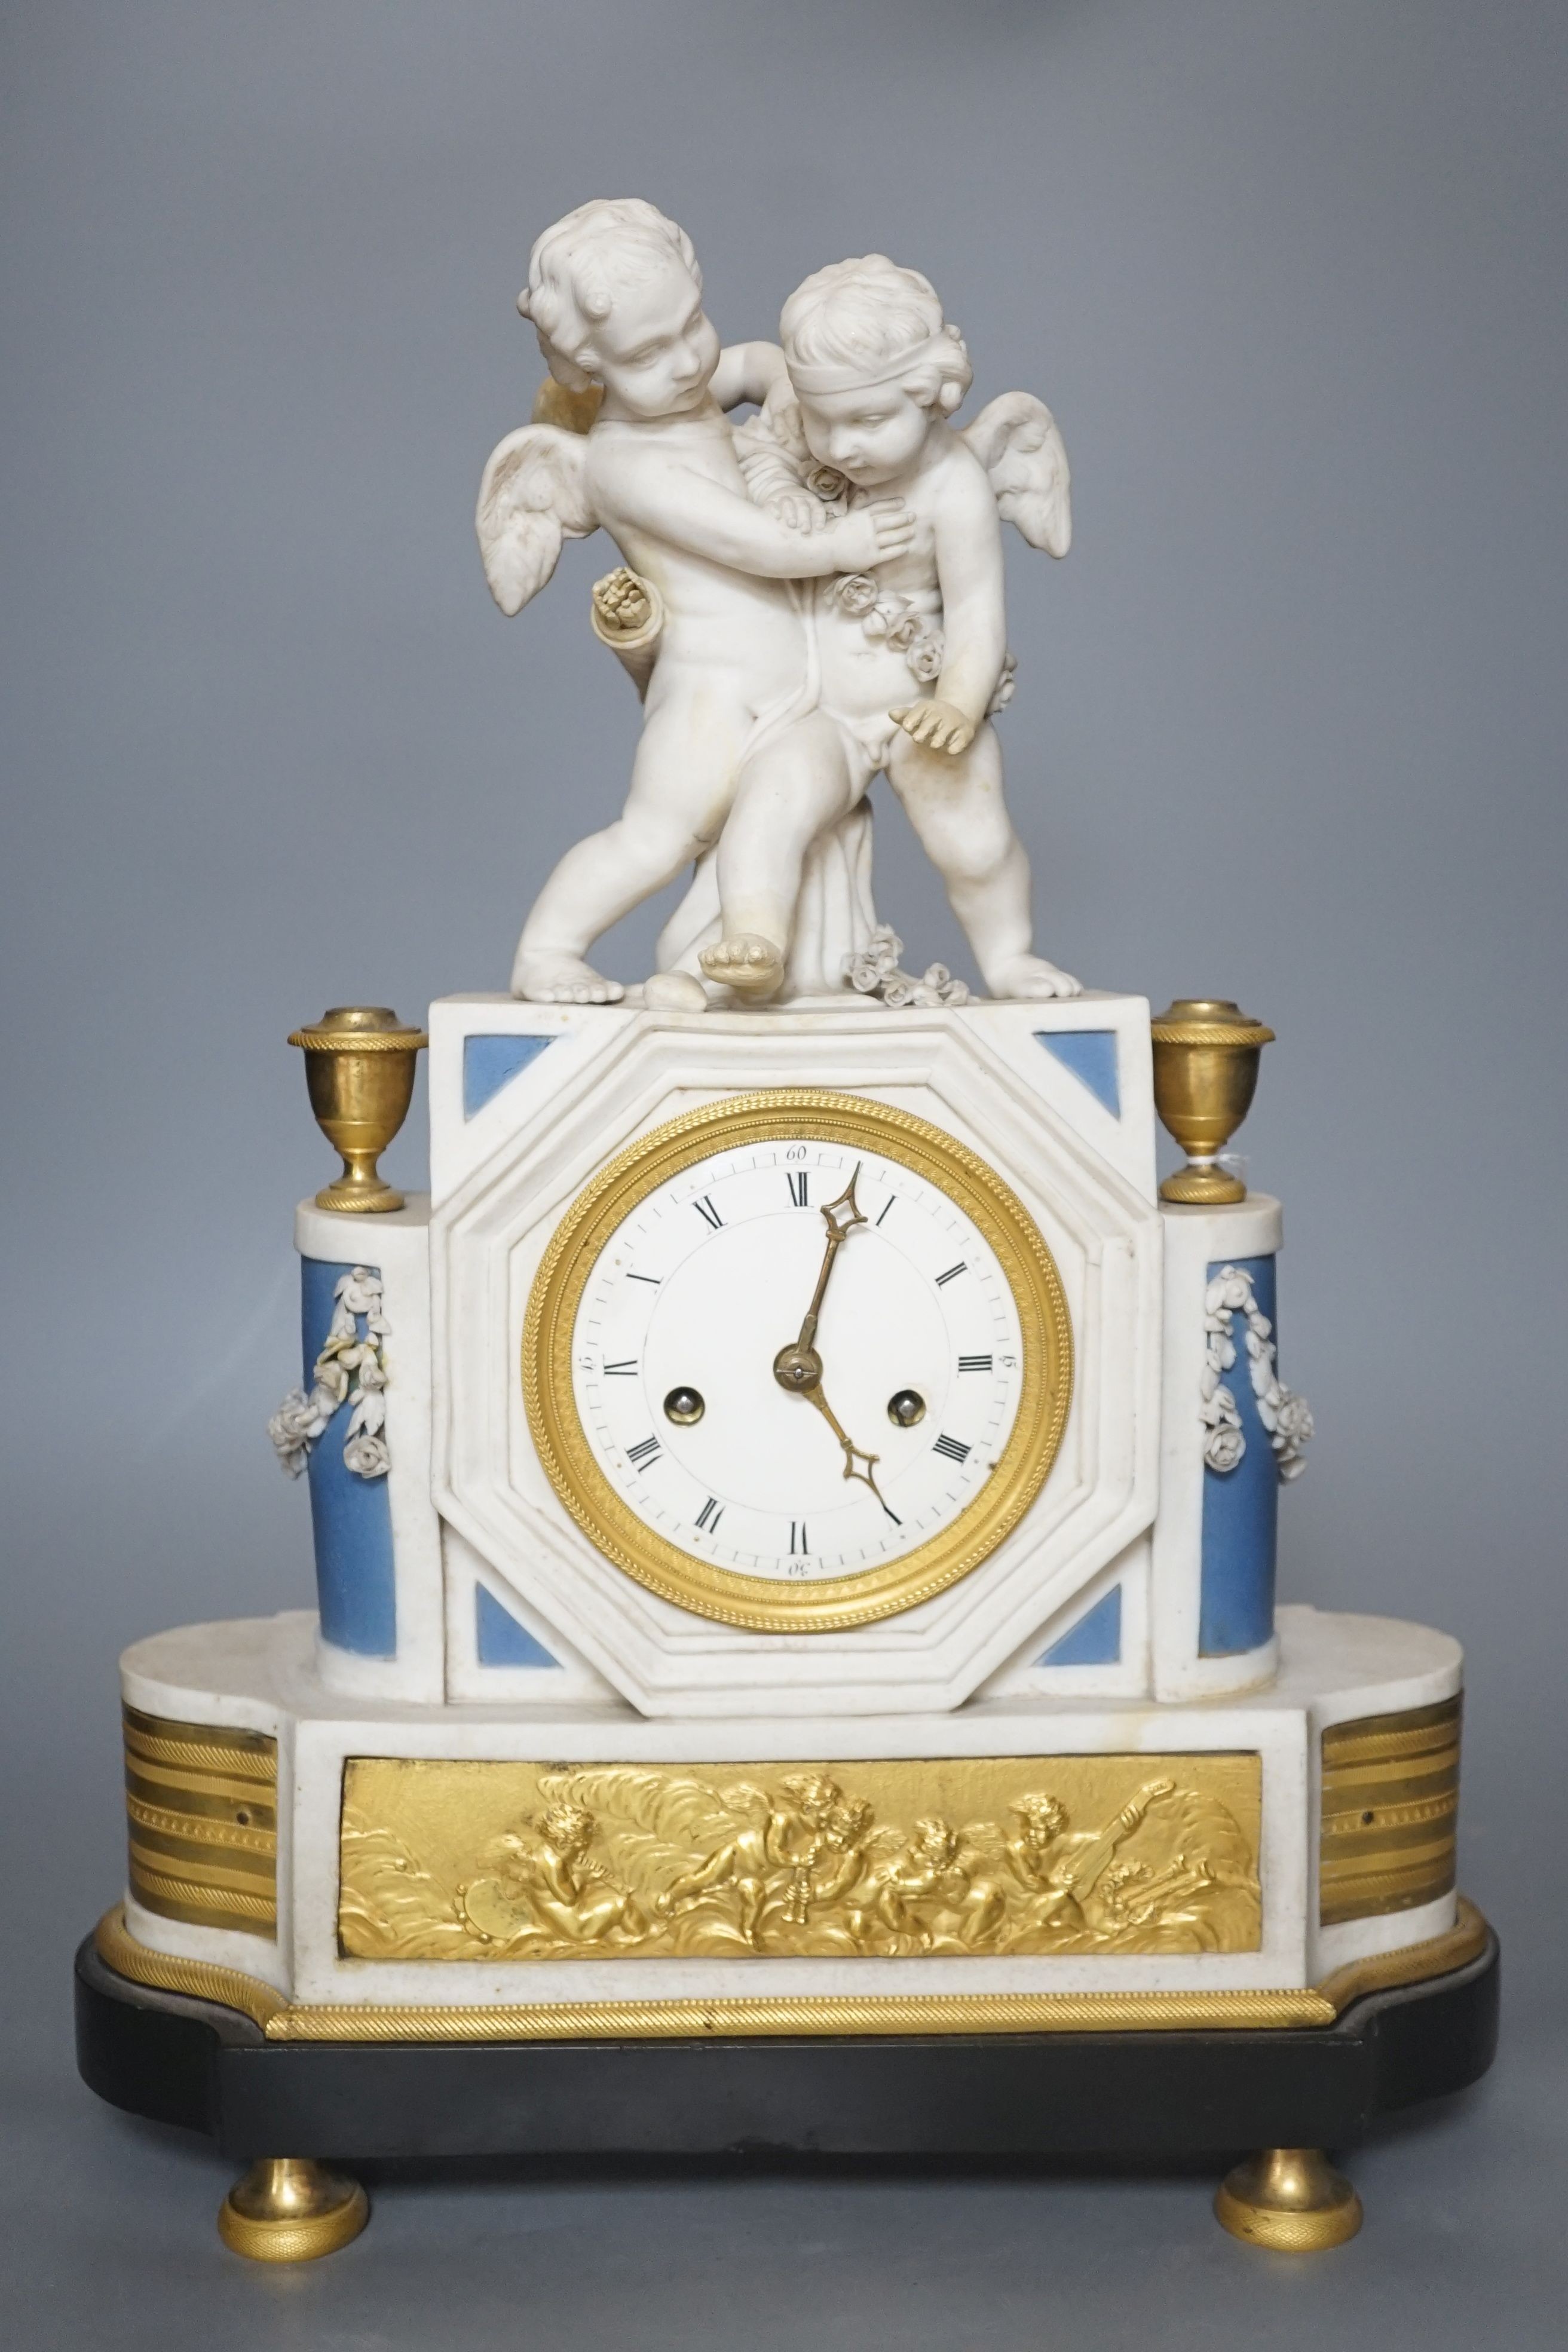 A 19th century French biscuit porcelain and ormolu mounted mantel clock, 43 cm high